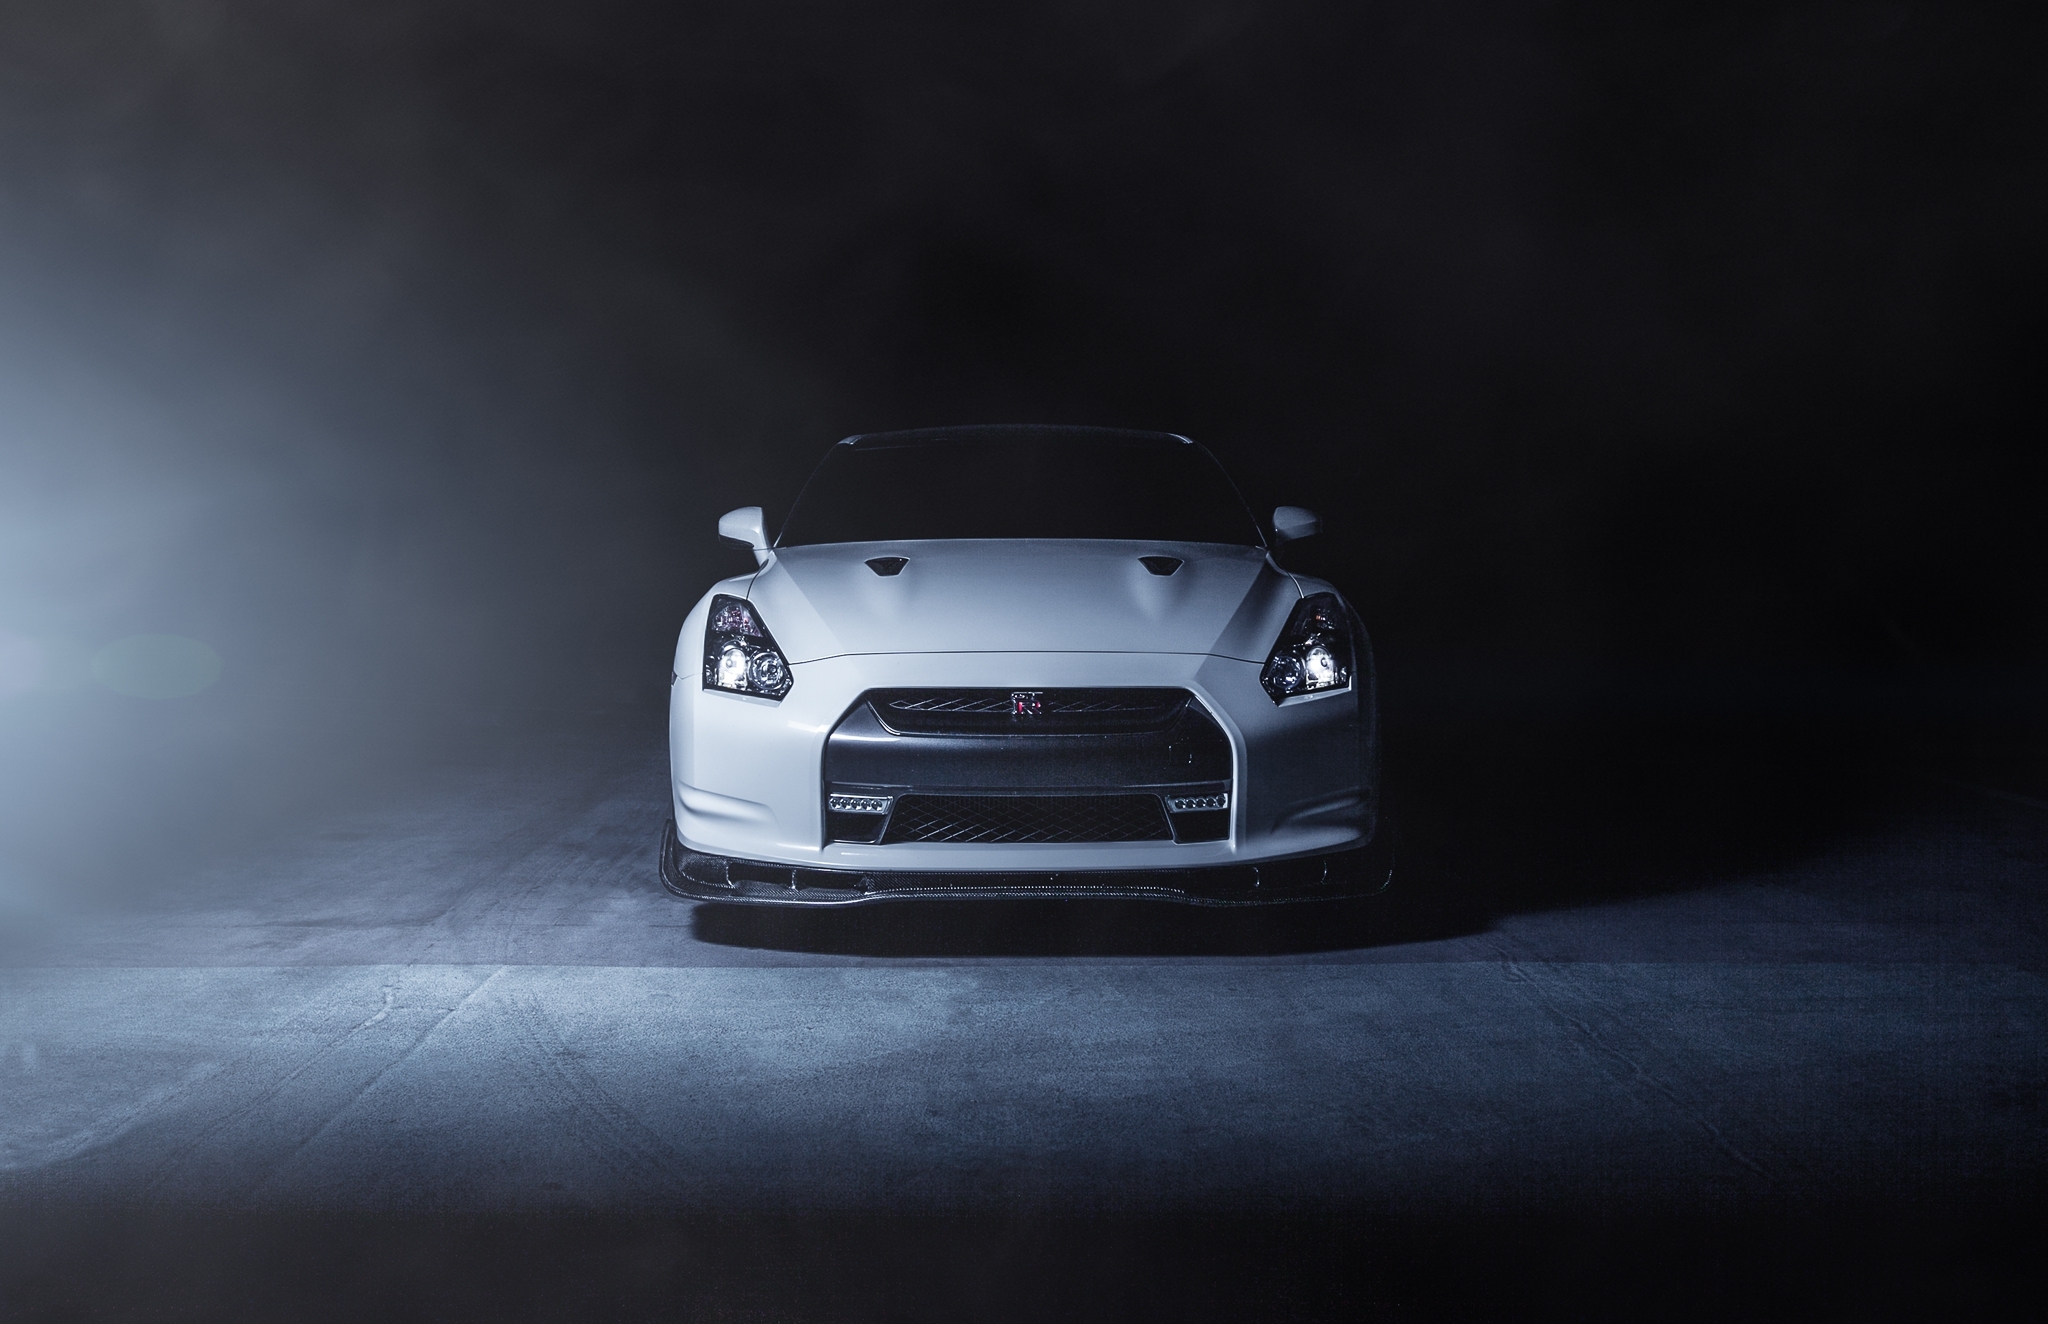 102157 download wallpaper nissan, smoke, cars, white, gt-r, front end, limber, r35 screensavers and pictures for free